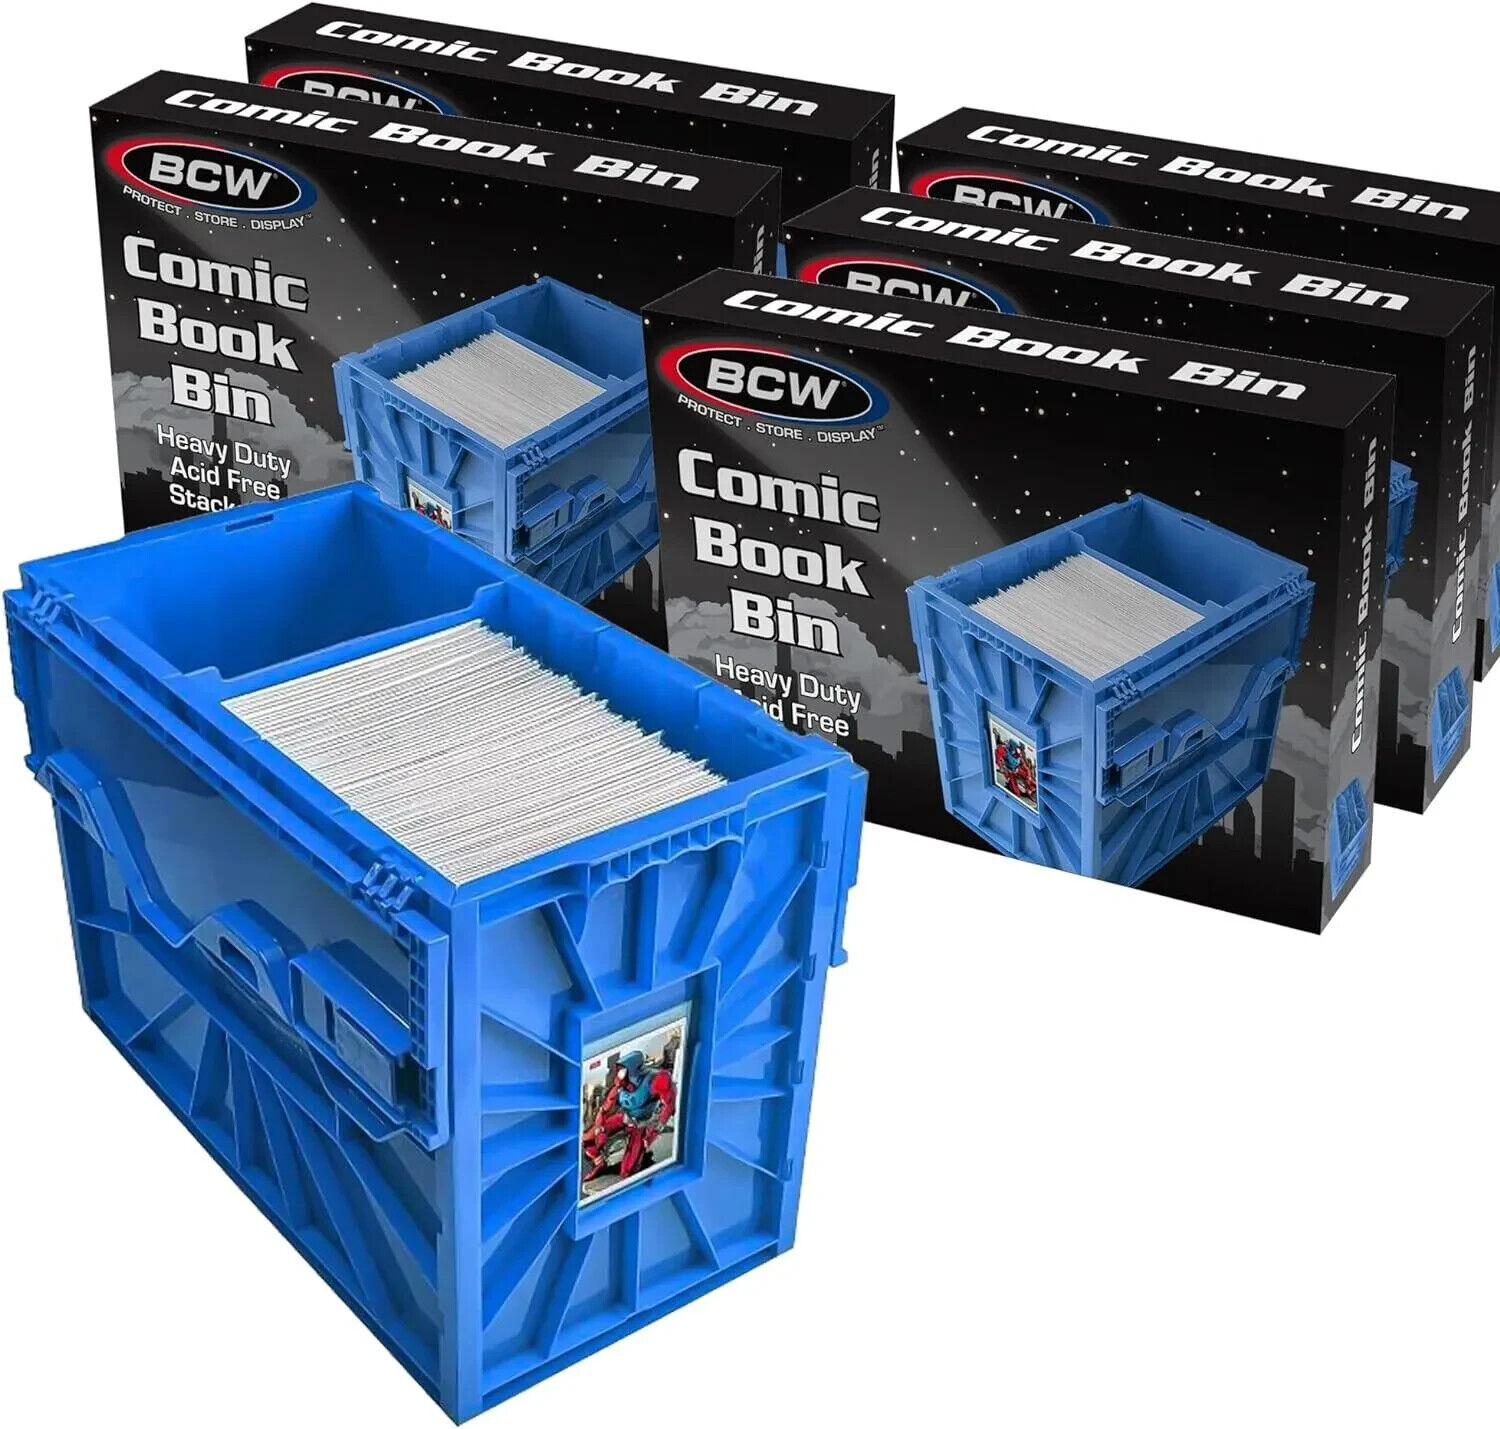 1 Case (5) BCW Short Plastic Comic Book Bins Boxes Heavy Duty with Lid - BLUE